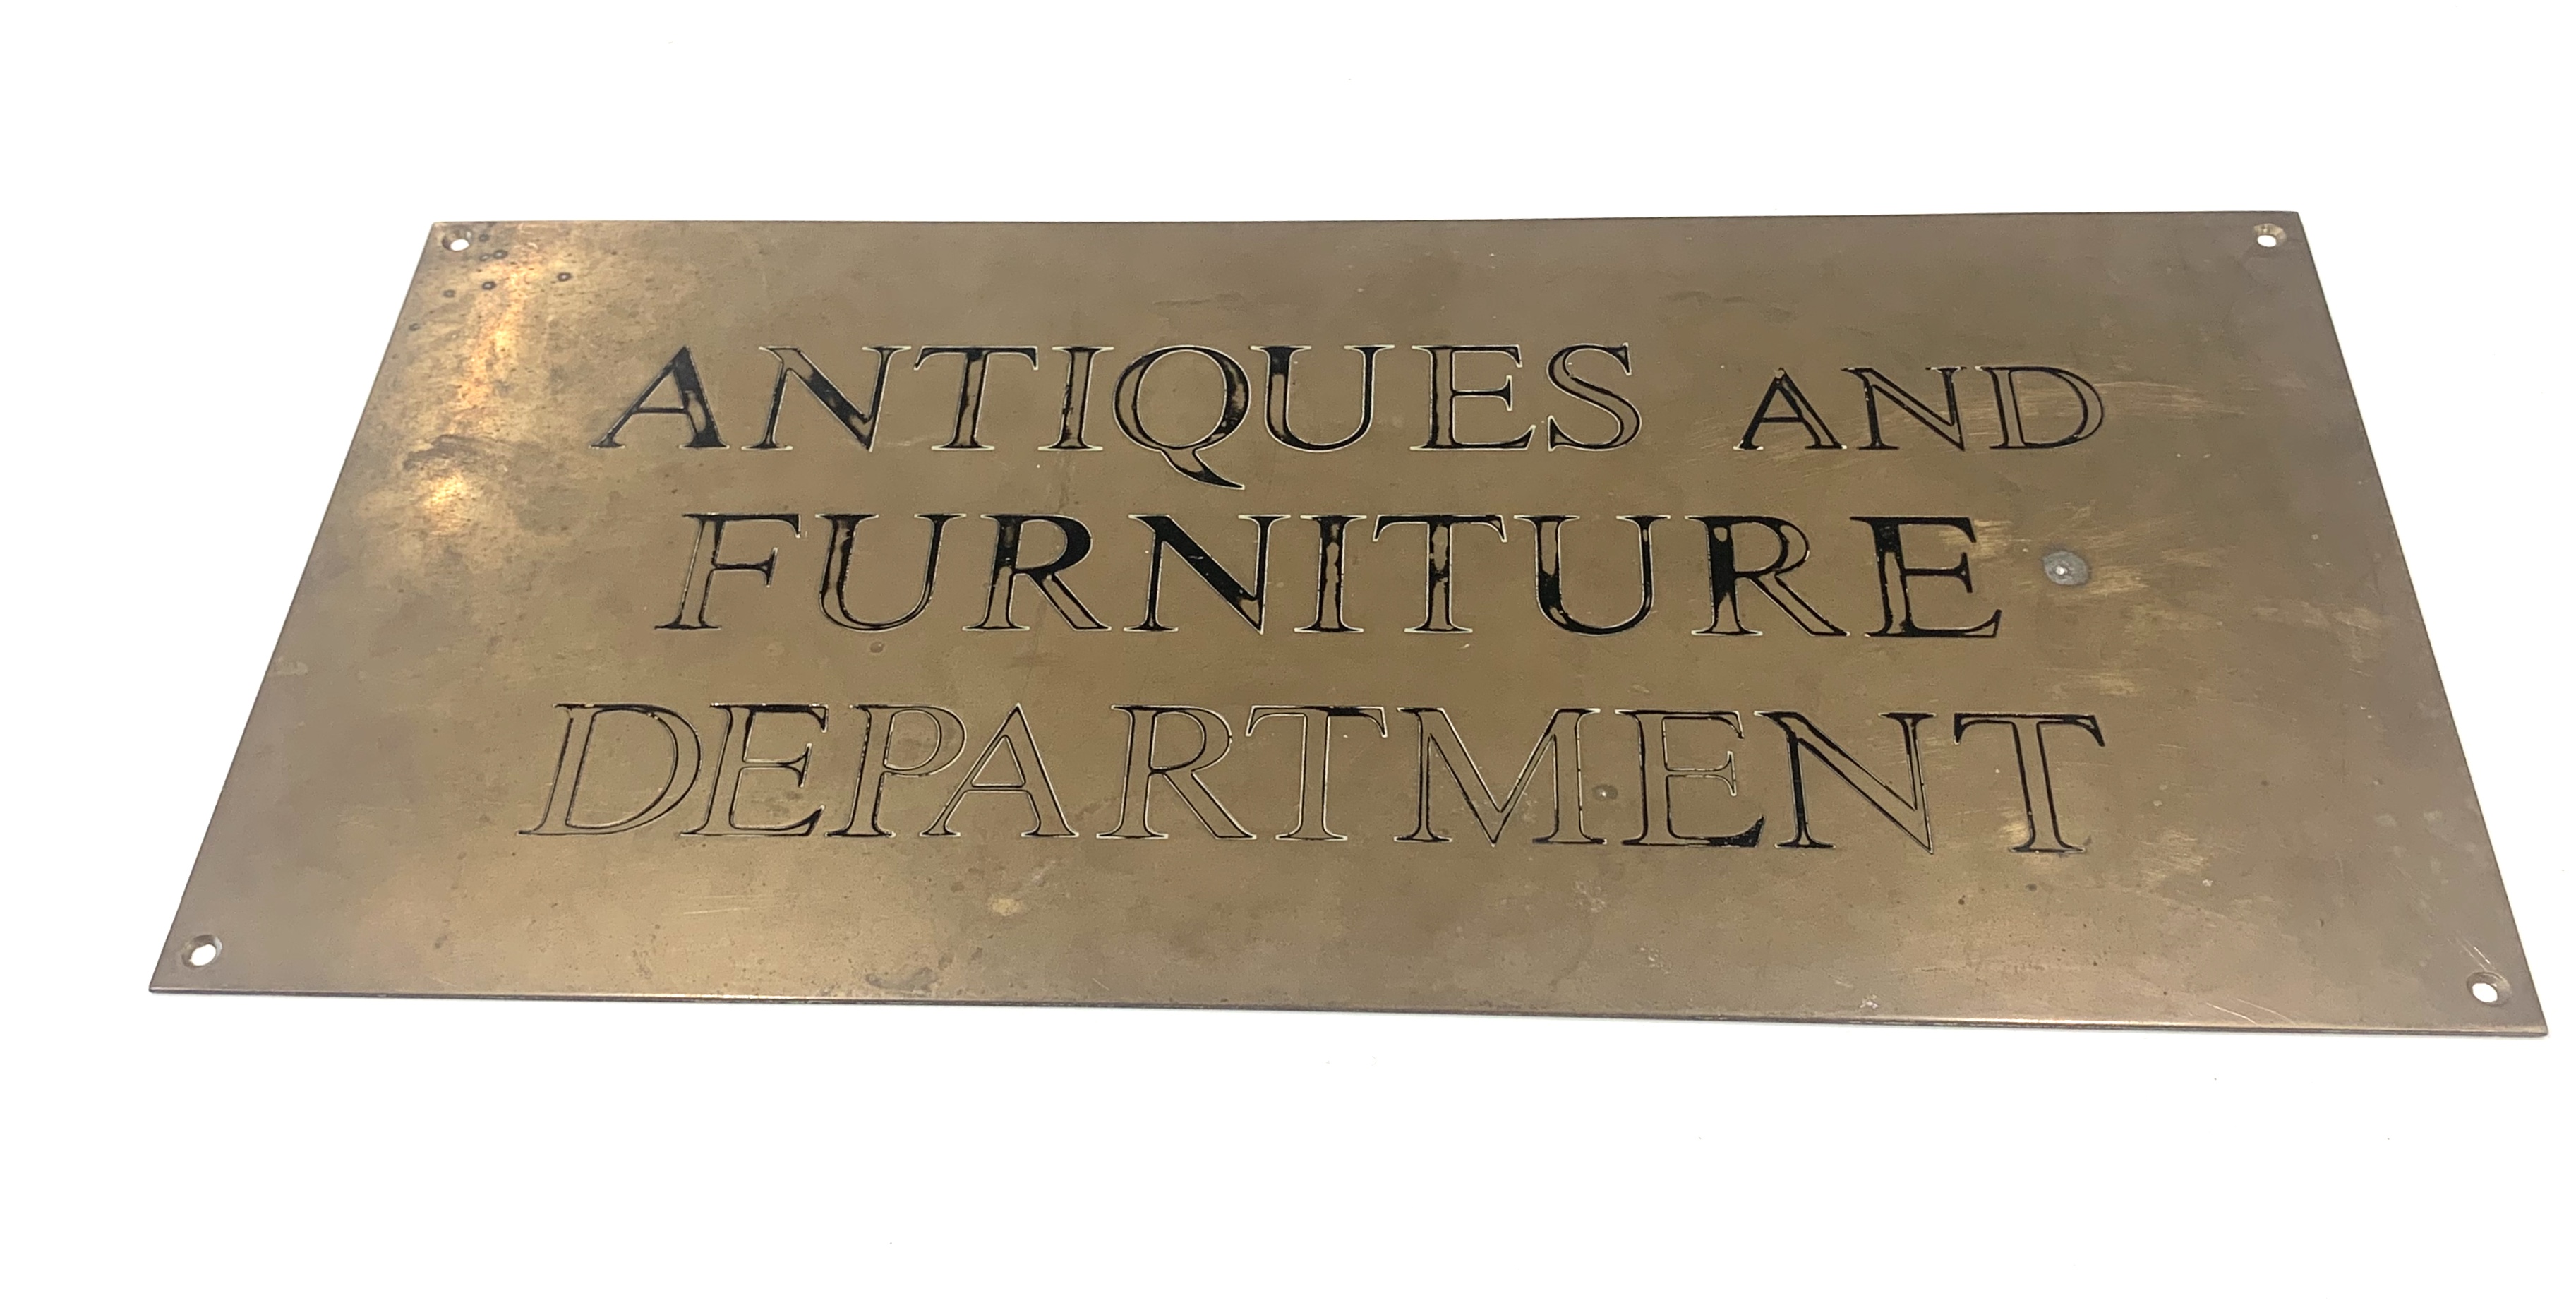 Mid 20th Century brass plaque - possibly from a Department Store. ANTIQUES & FURNITURE DEPARTMENT.